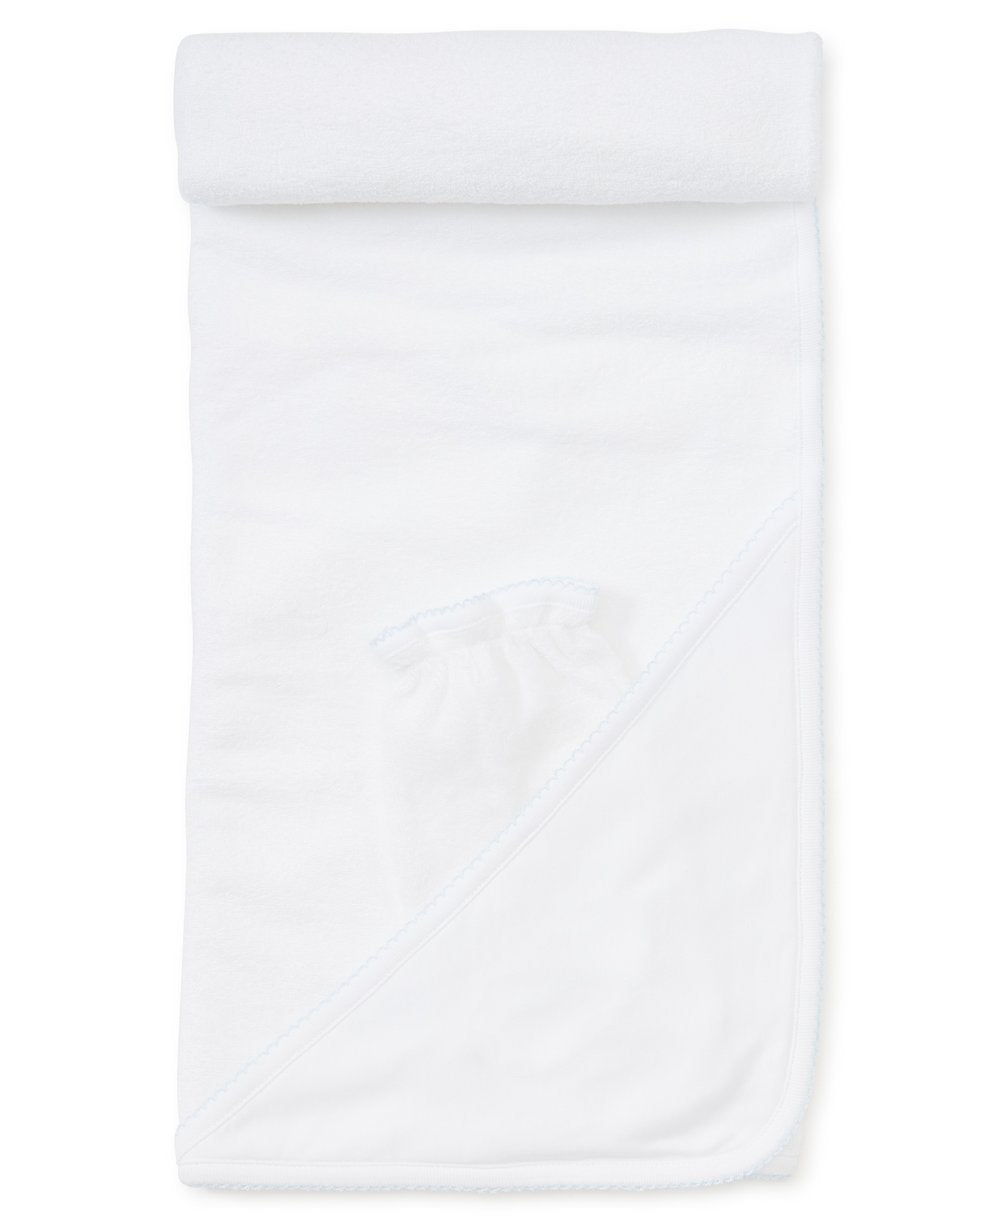 Towel with Mitt, White with Blue